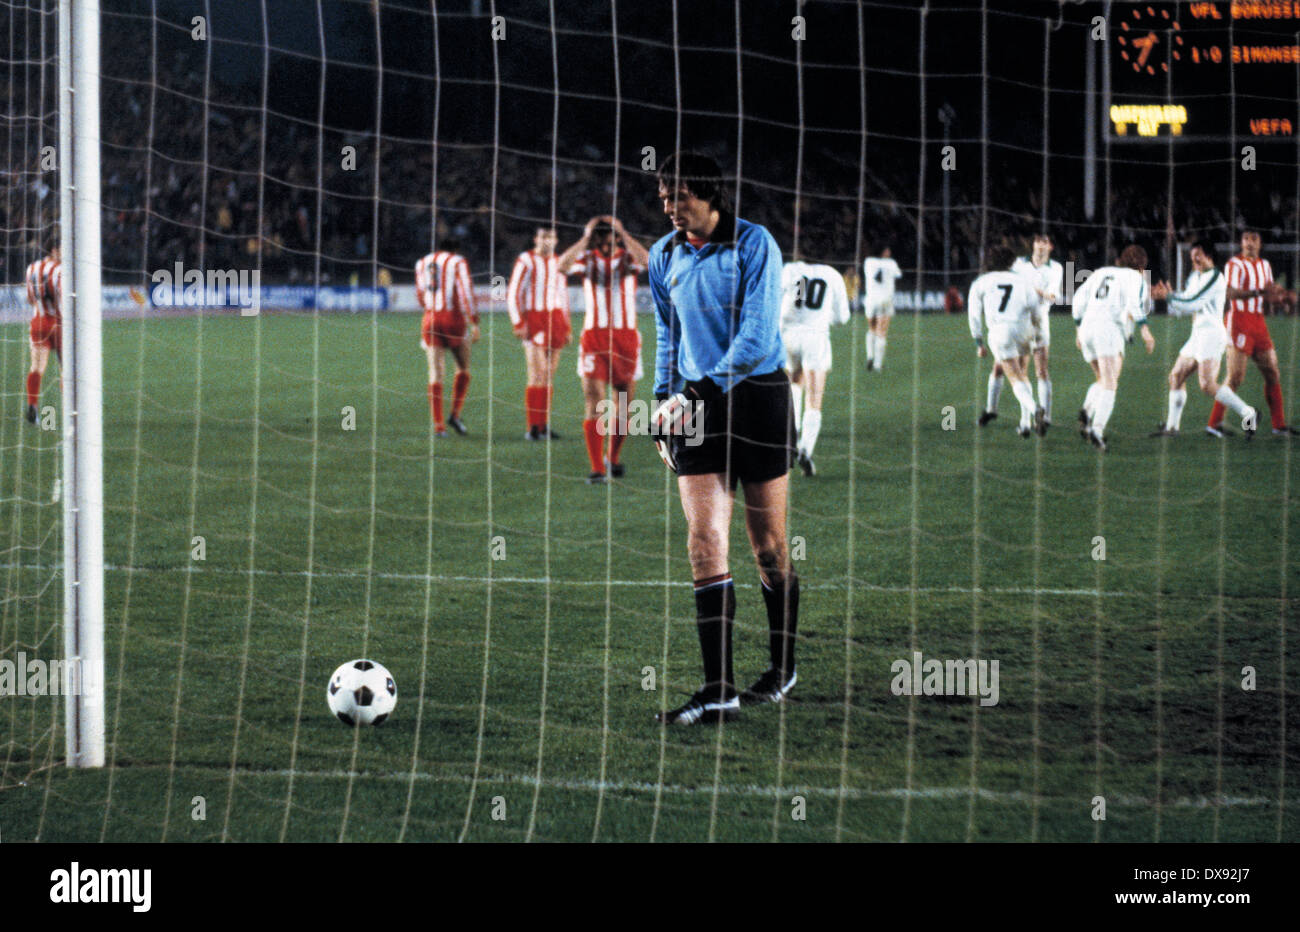 football, UEFA Cup, Europa League, 1978/1979, final, second leg, Rhine Stadium in Duesseldorf, Borussia Moenchengladbach versus Red Star Belgrade 1:0, scene of the match, Allan Simonsen (MG) scores the winning goal by penalty resulting from a foul, keeper Stock Photo